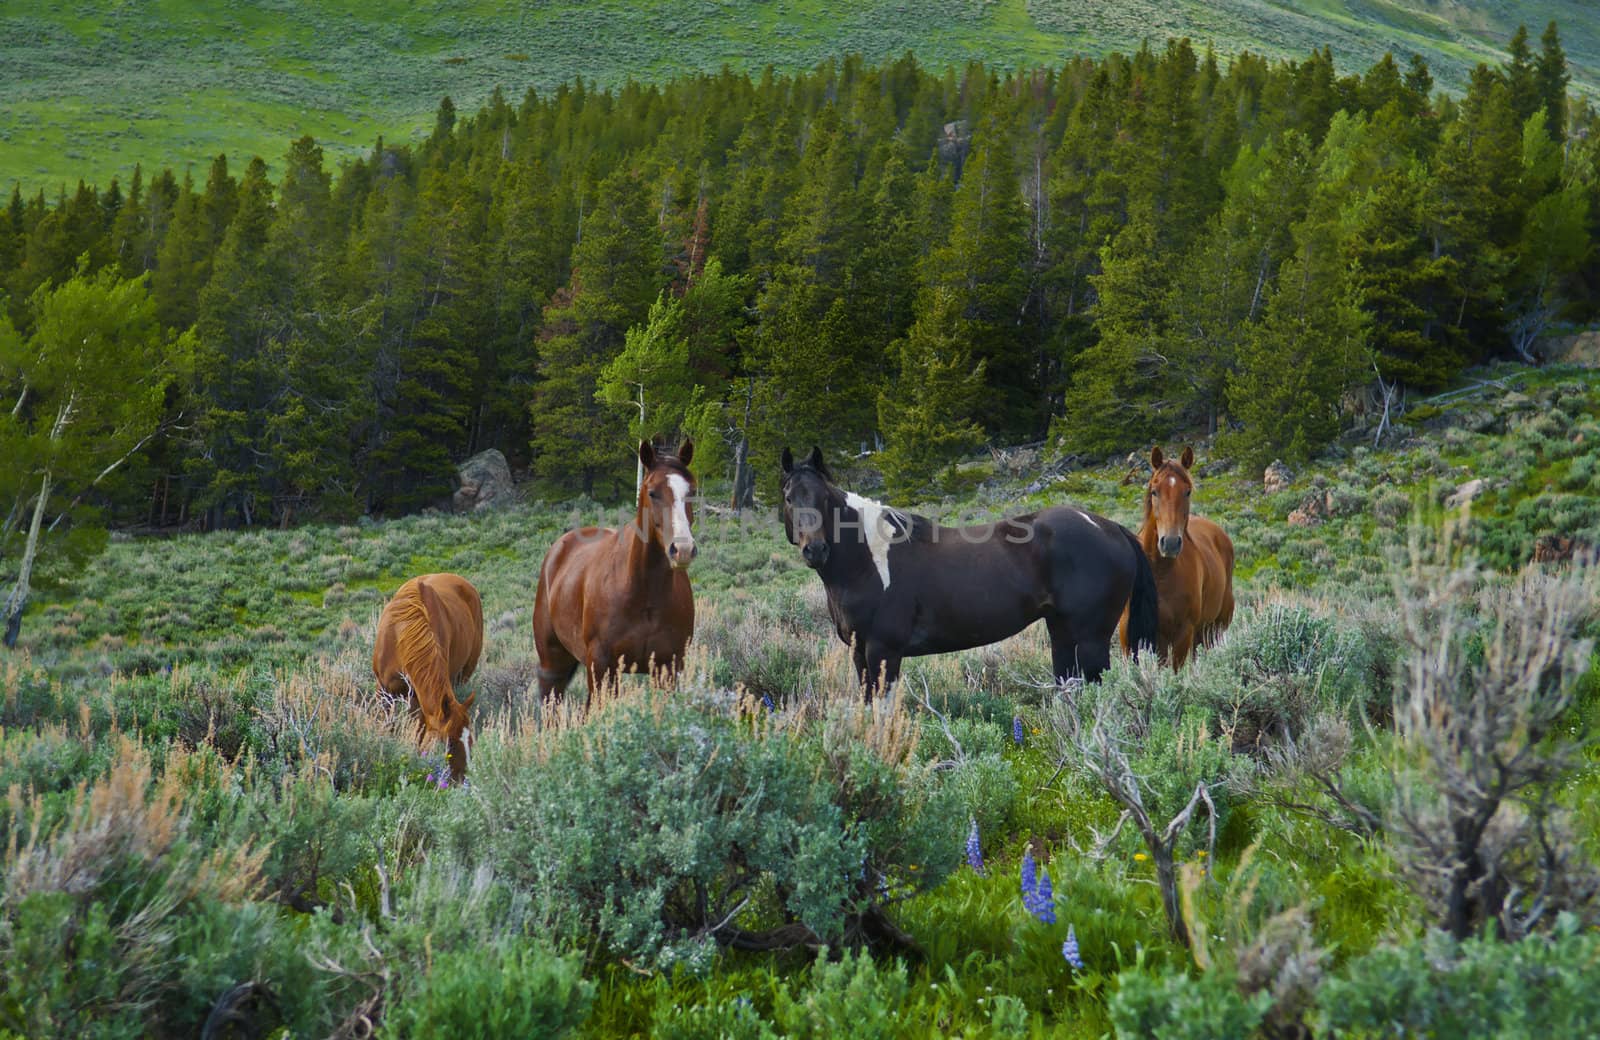 Beautiful Horses feeding in a grassy pasture